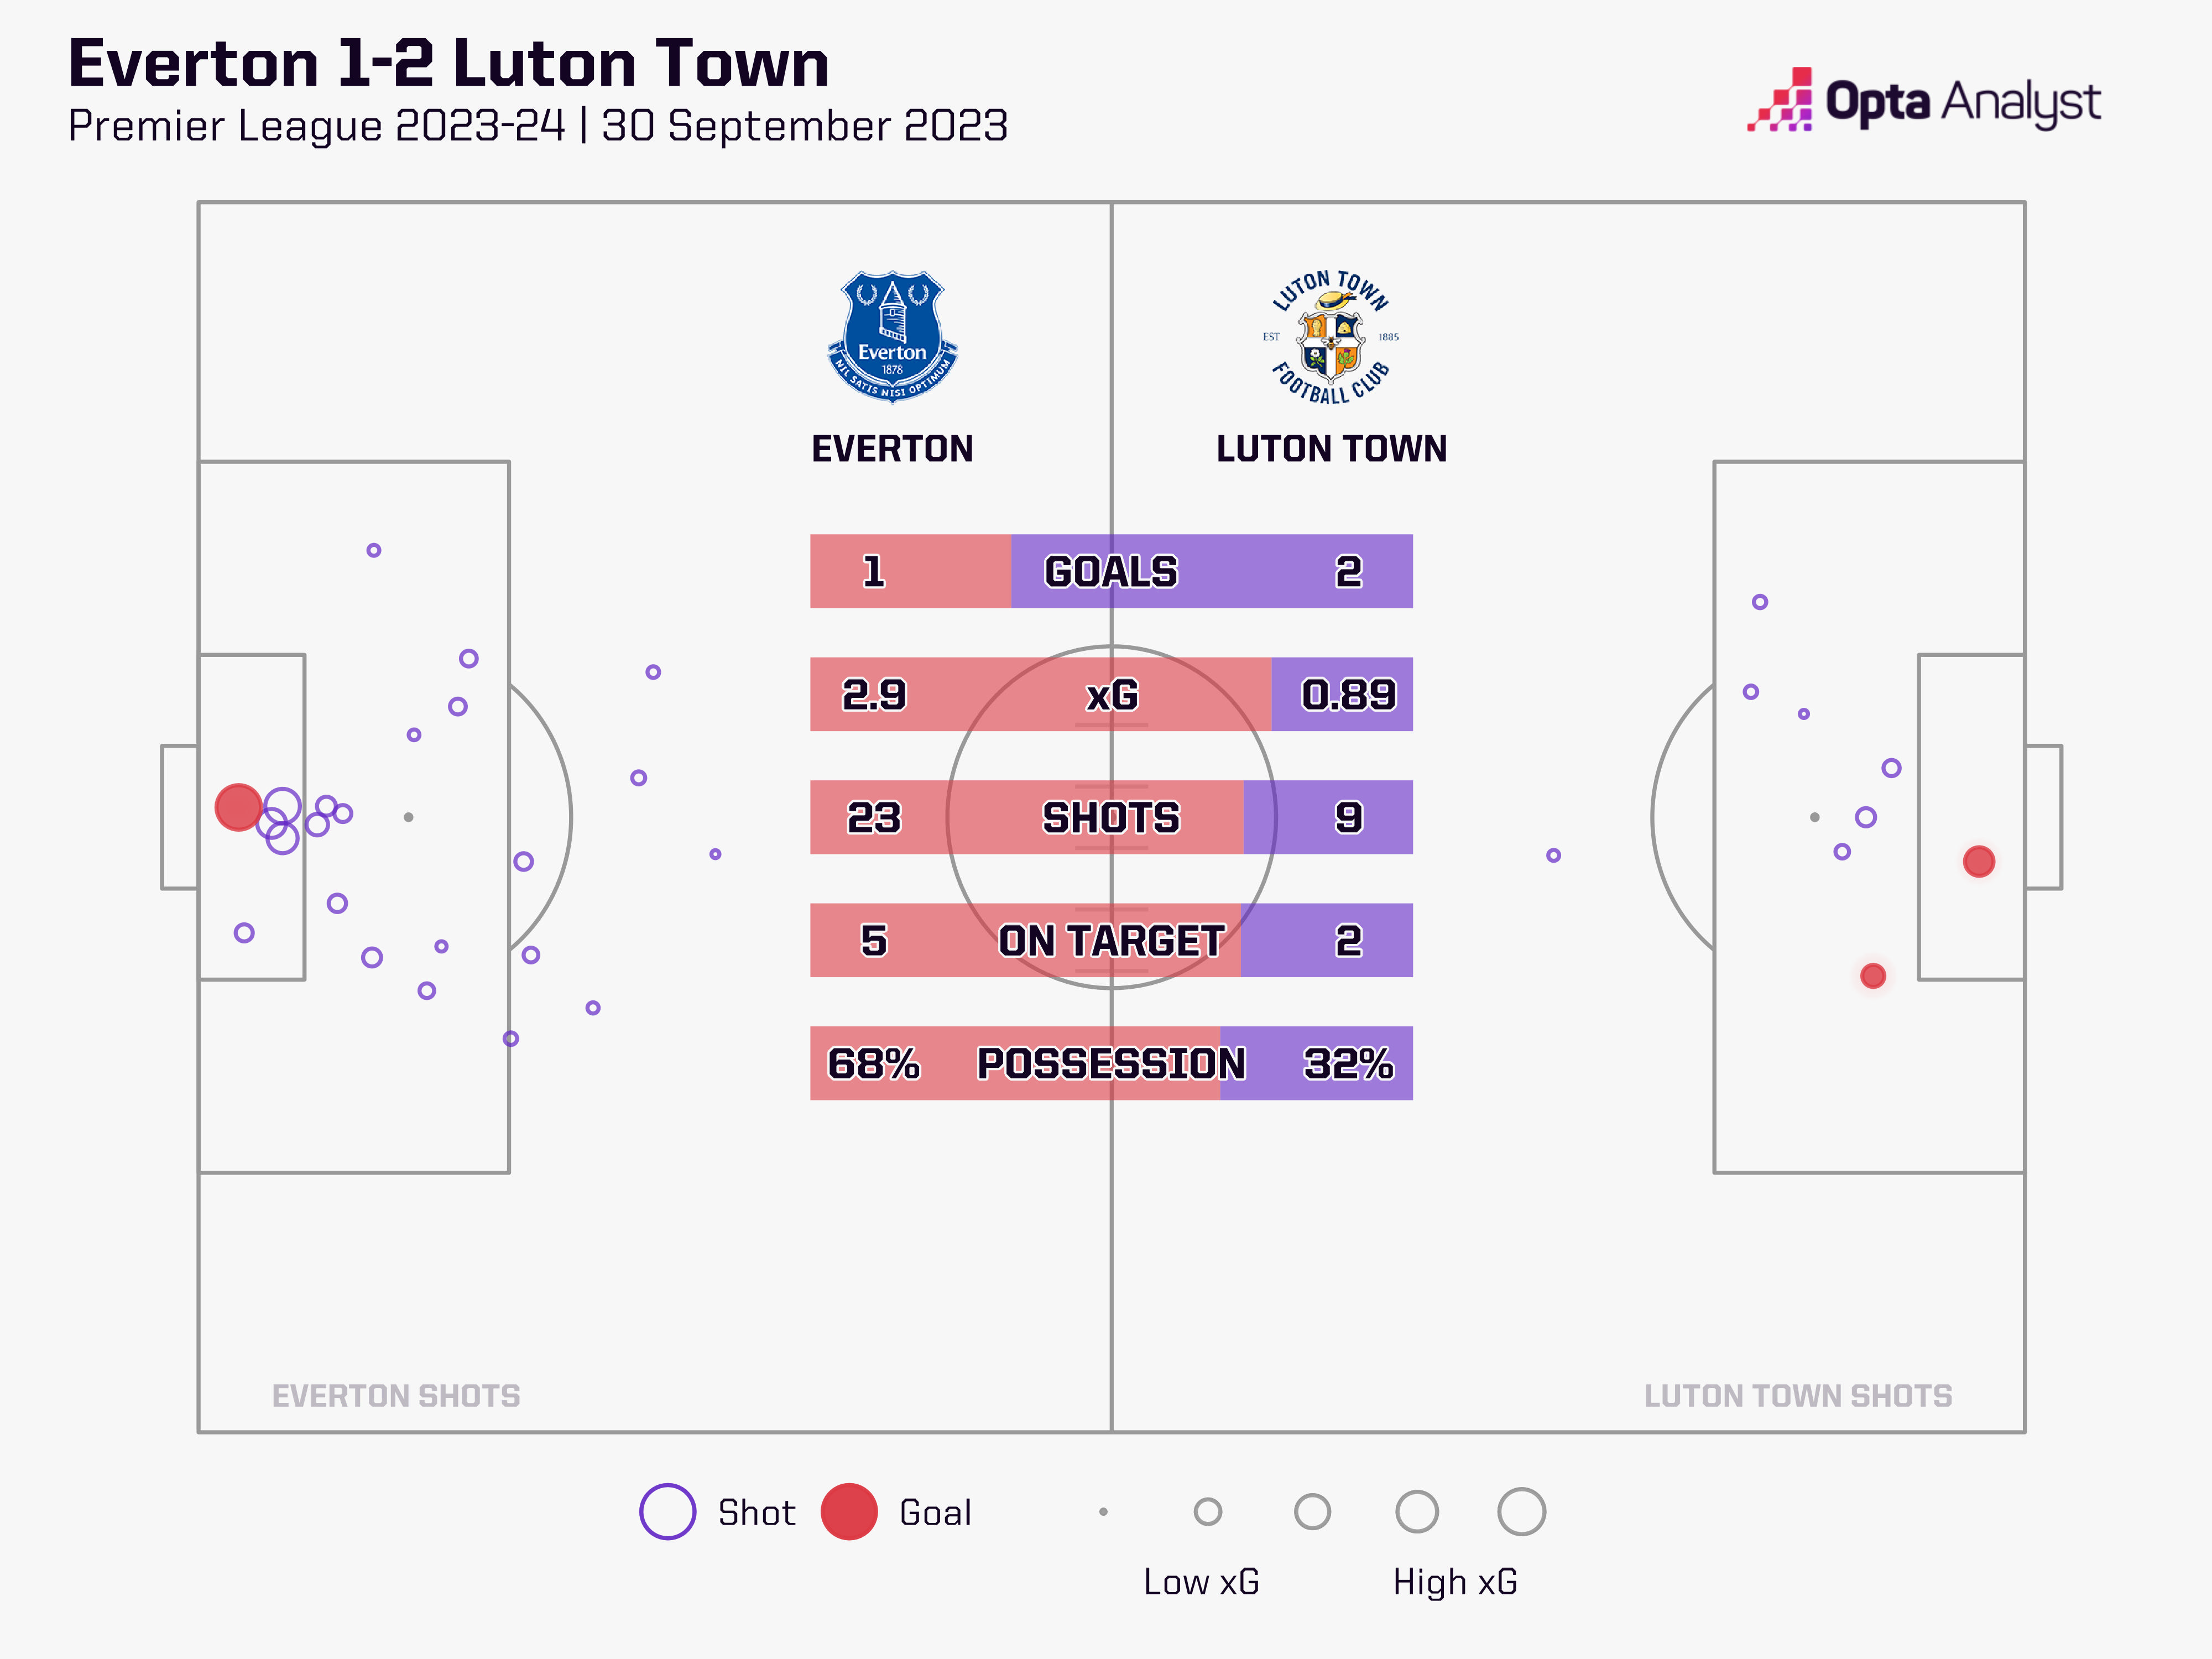 Luton Town inflicted a damaging defeat on Sean Dyche's team